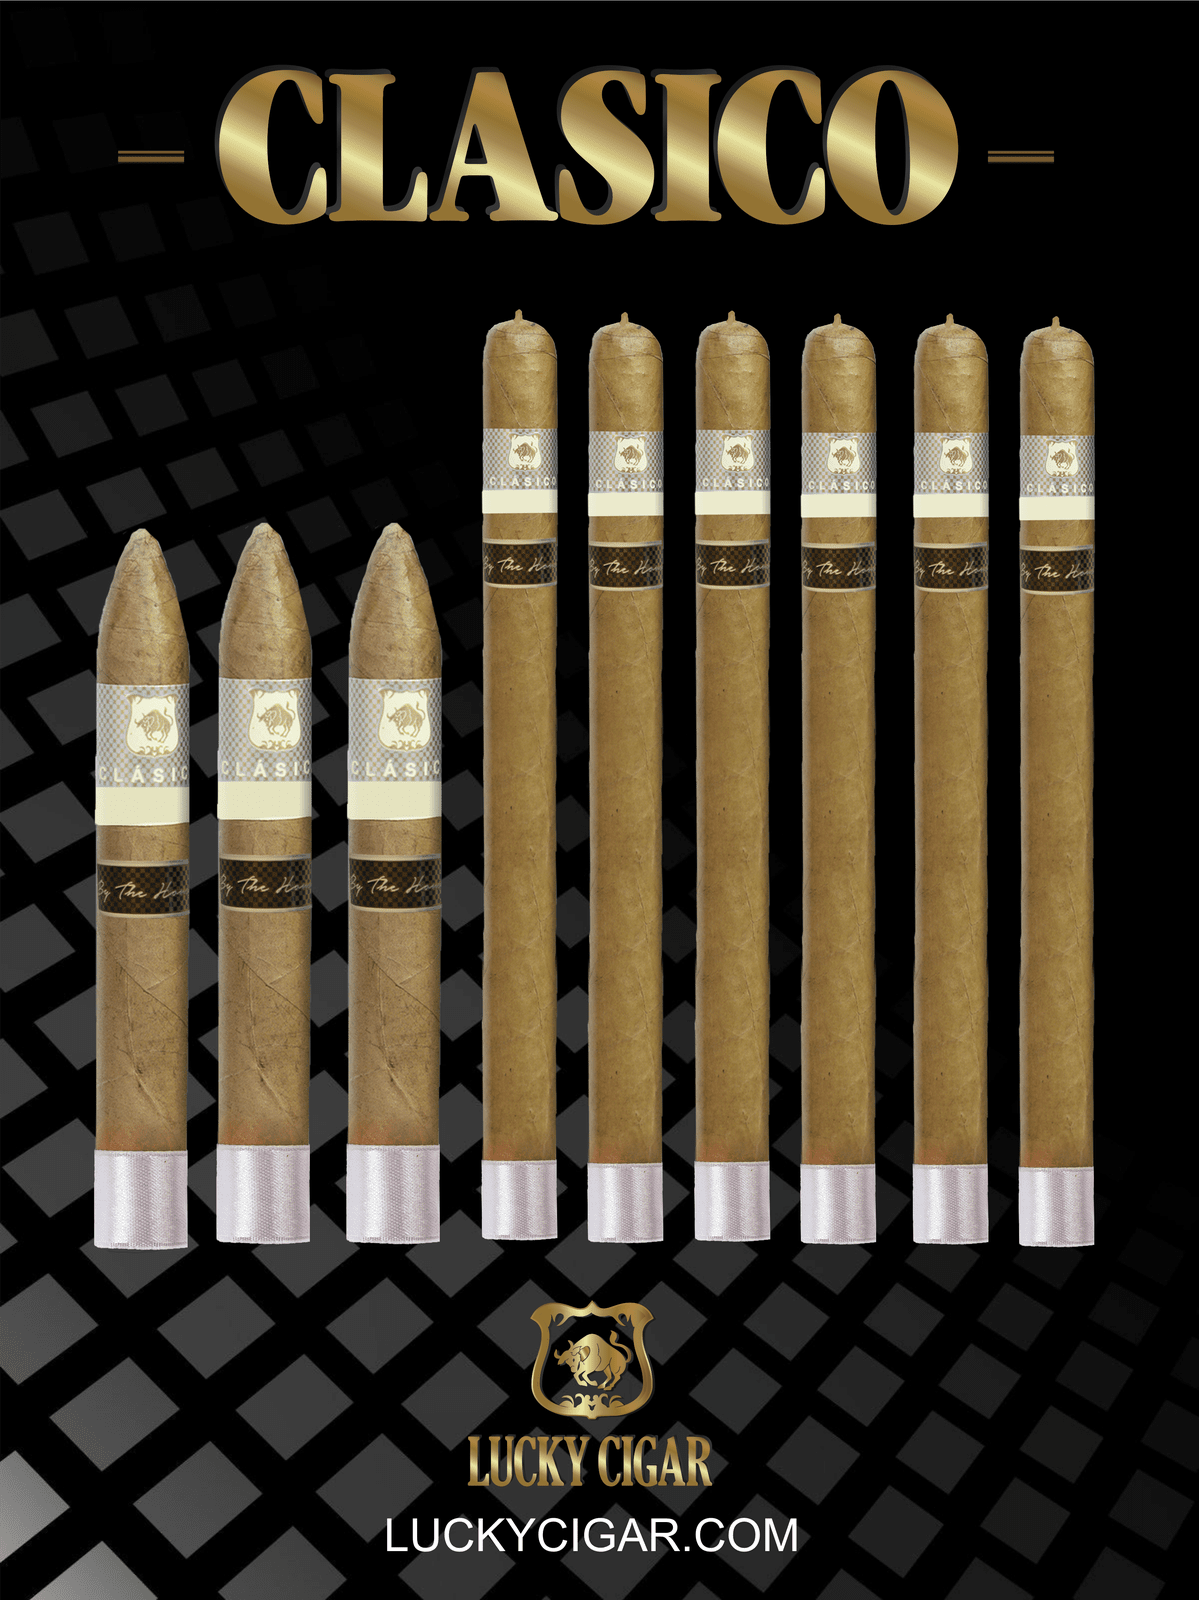 Classic Cigars - Classico by Lucky Cigar: Set of 9 Cigars, 6 Lancero, 3 Torpedo